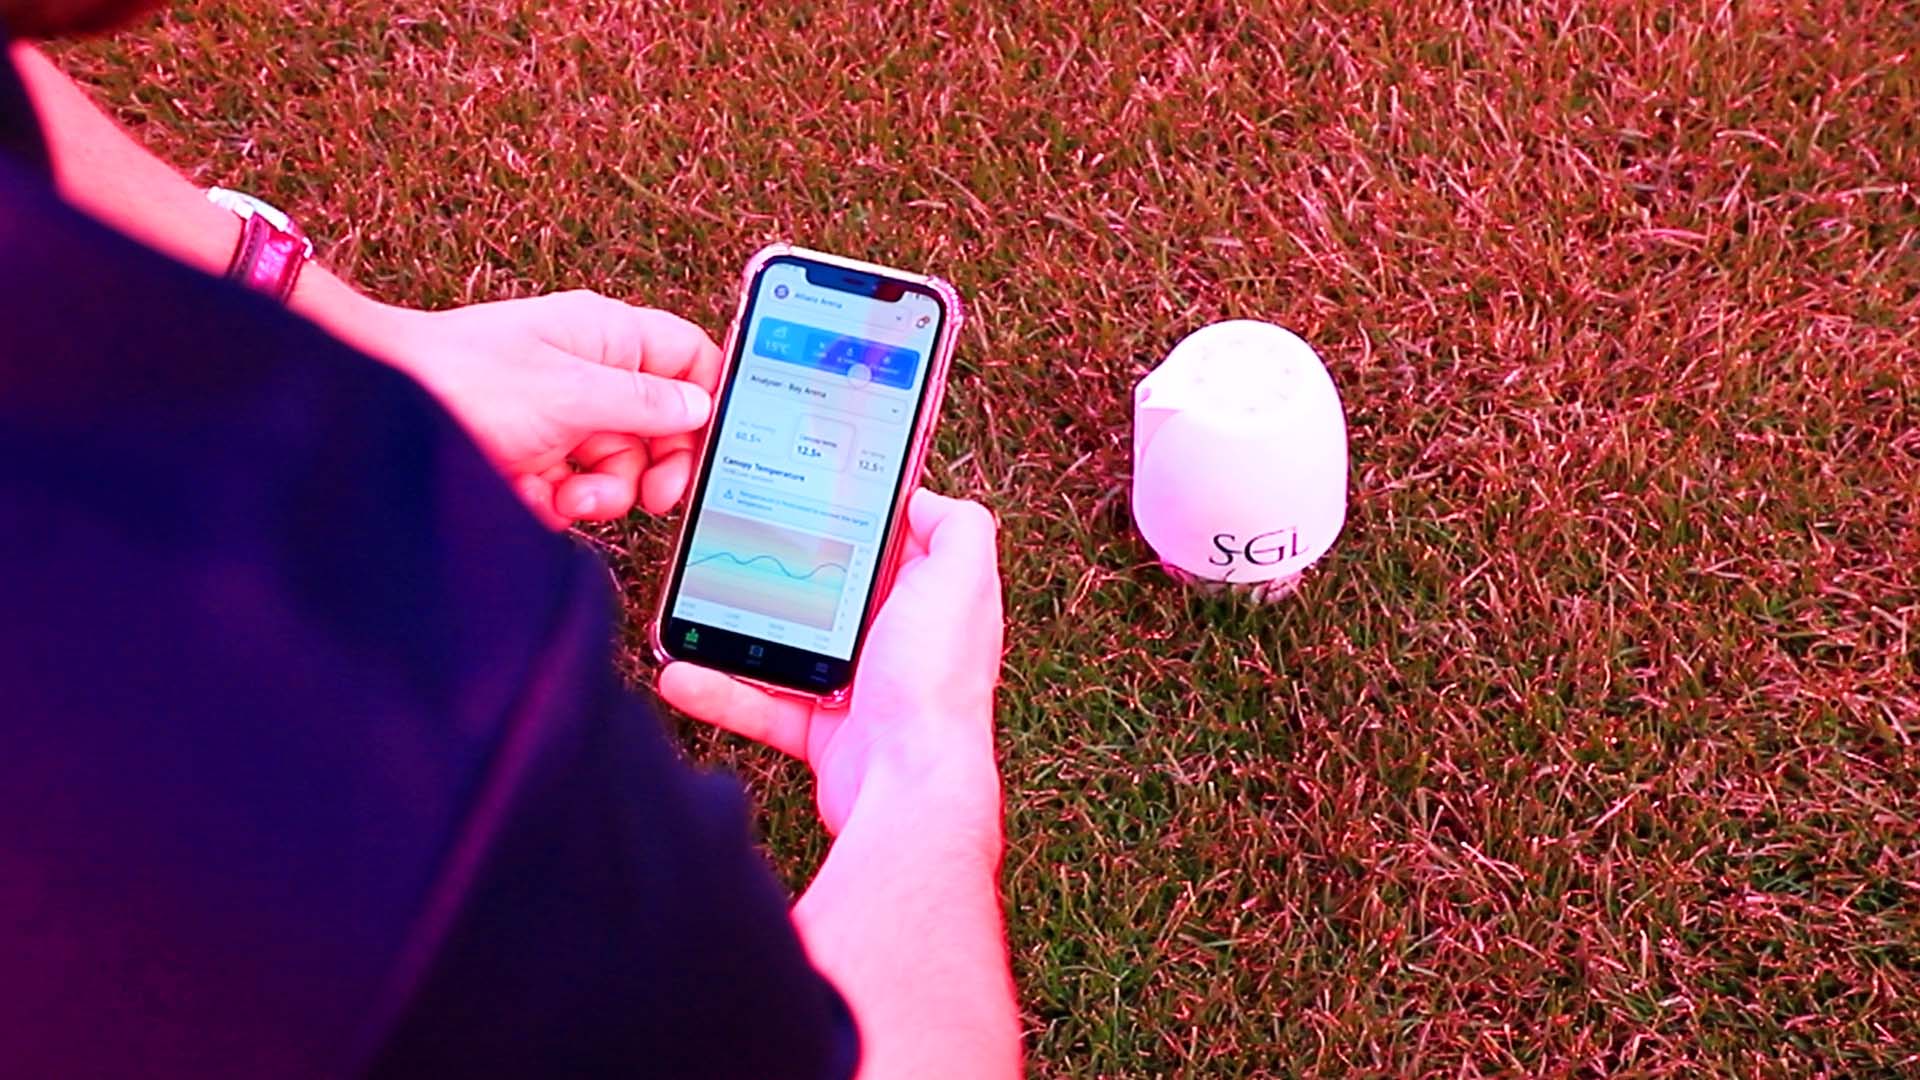 A grounds manager checking data on the SGL Portal with the SGL TurfPod in the background for efficient use of grass grow lighting technology.